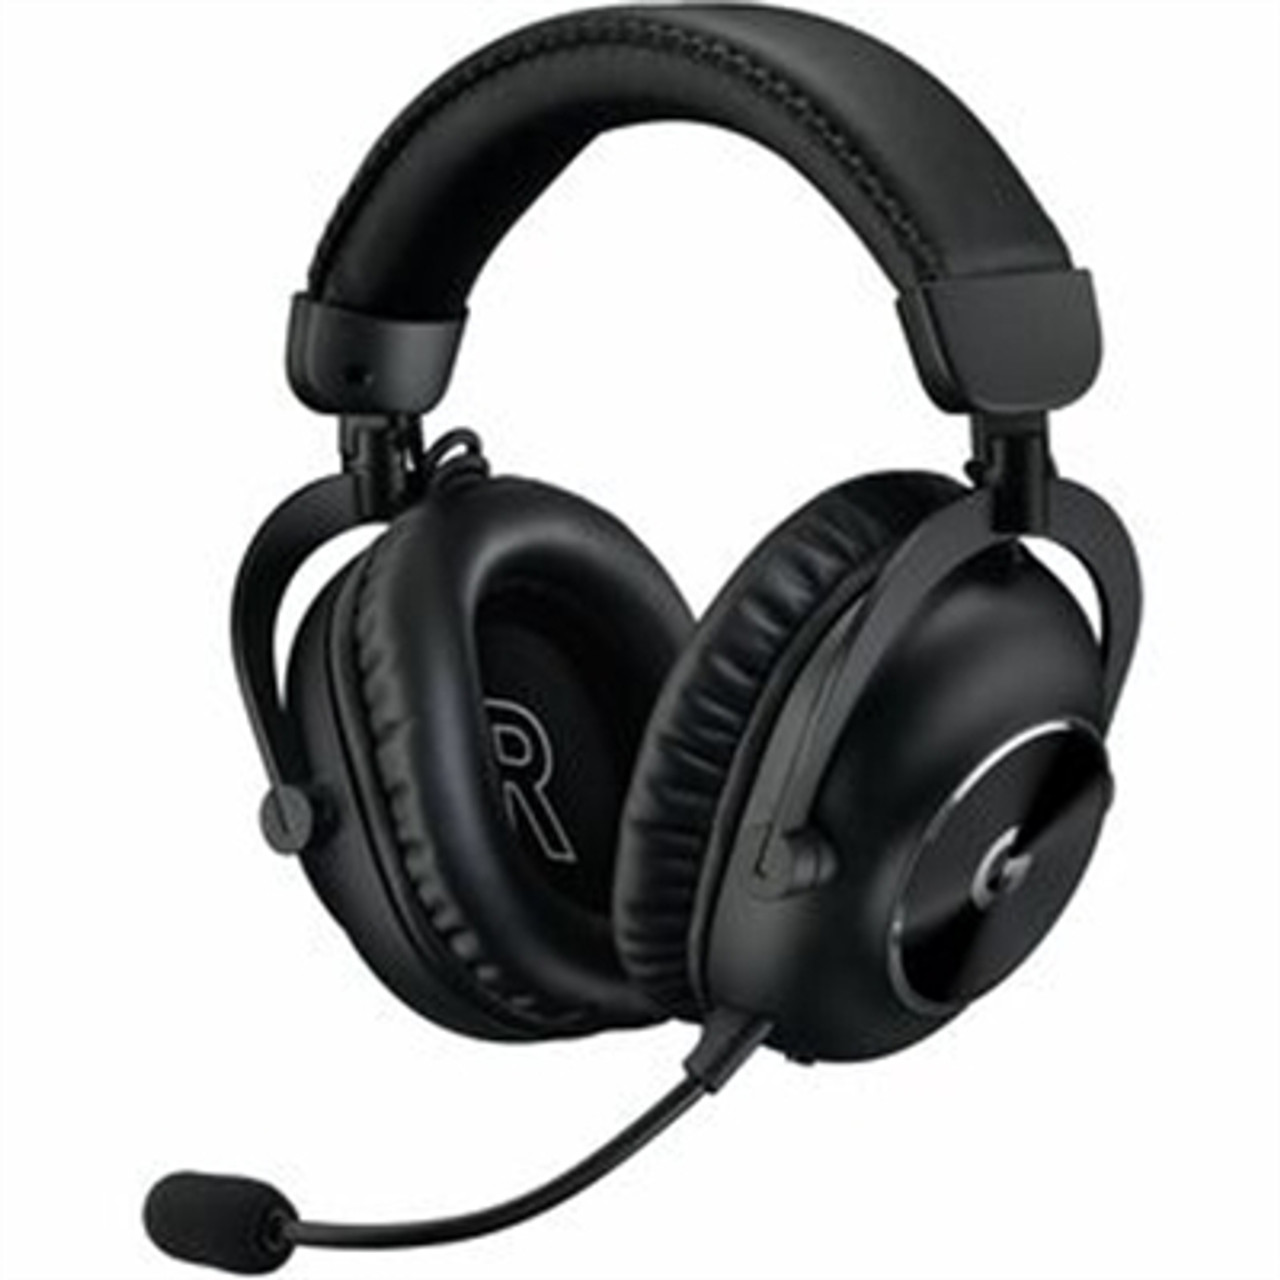 Pro X2 Wireless Gaming Hdst